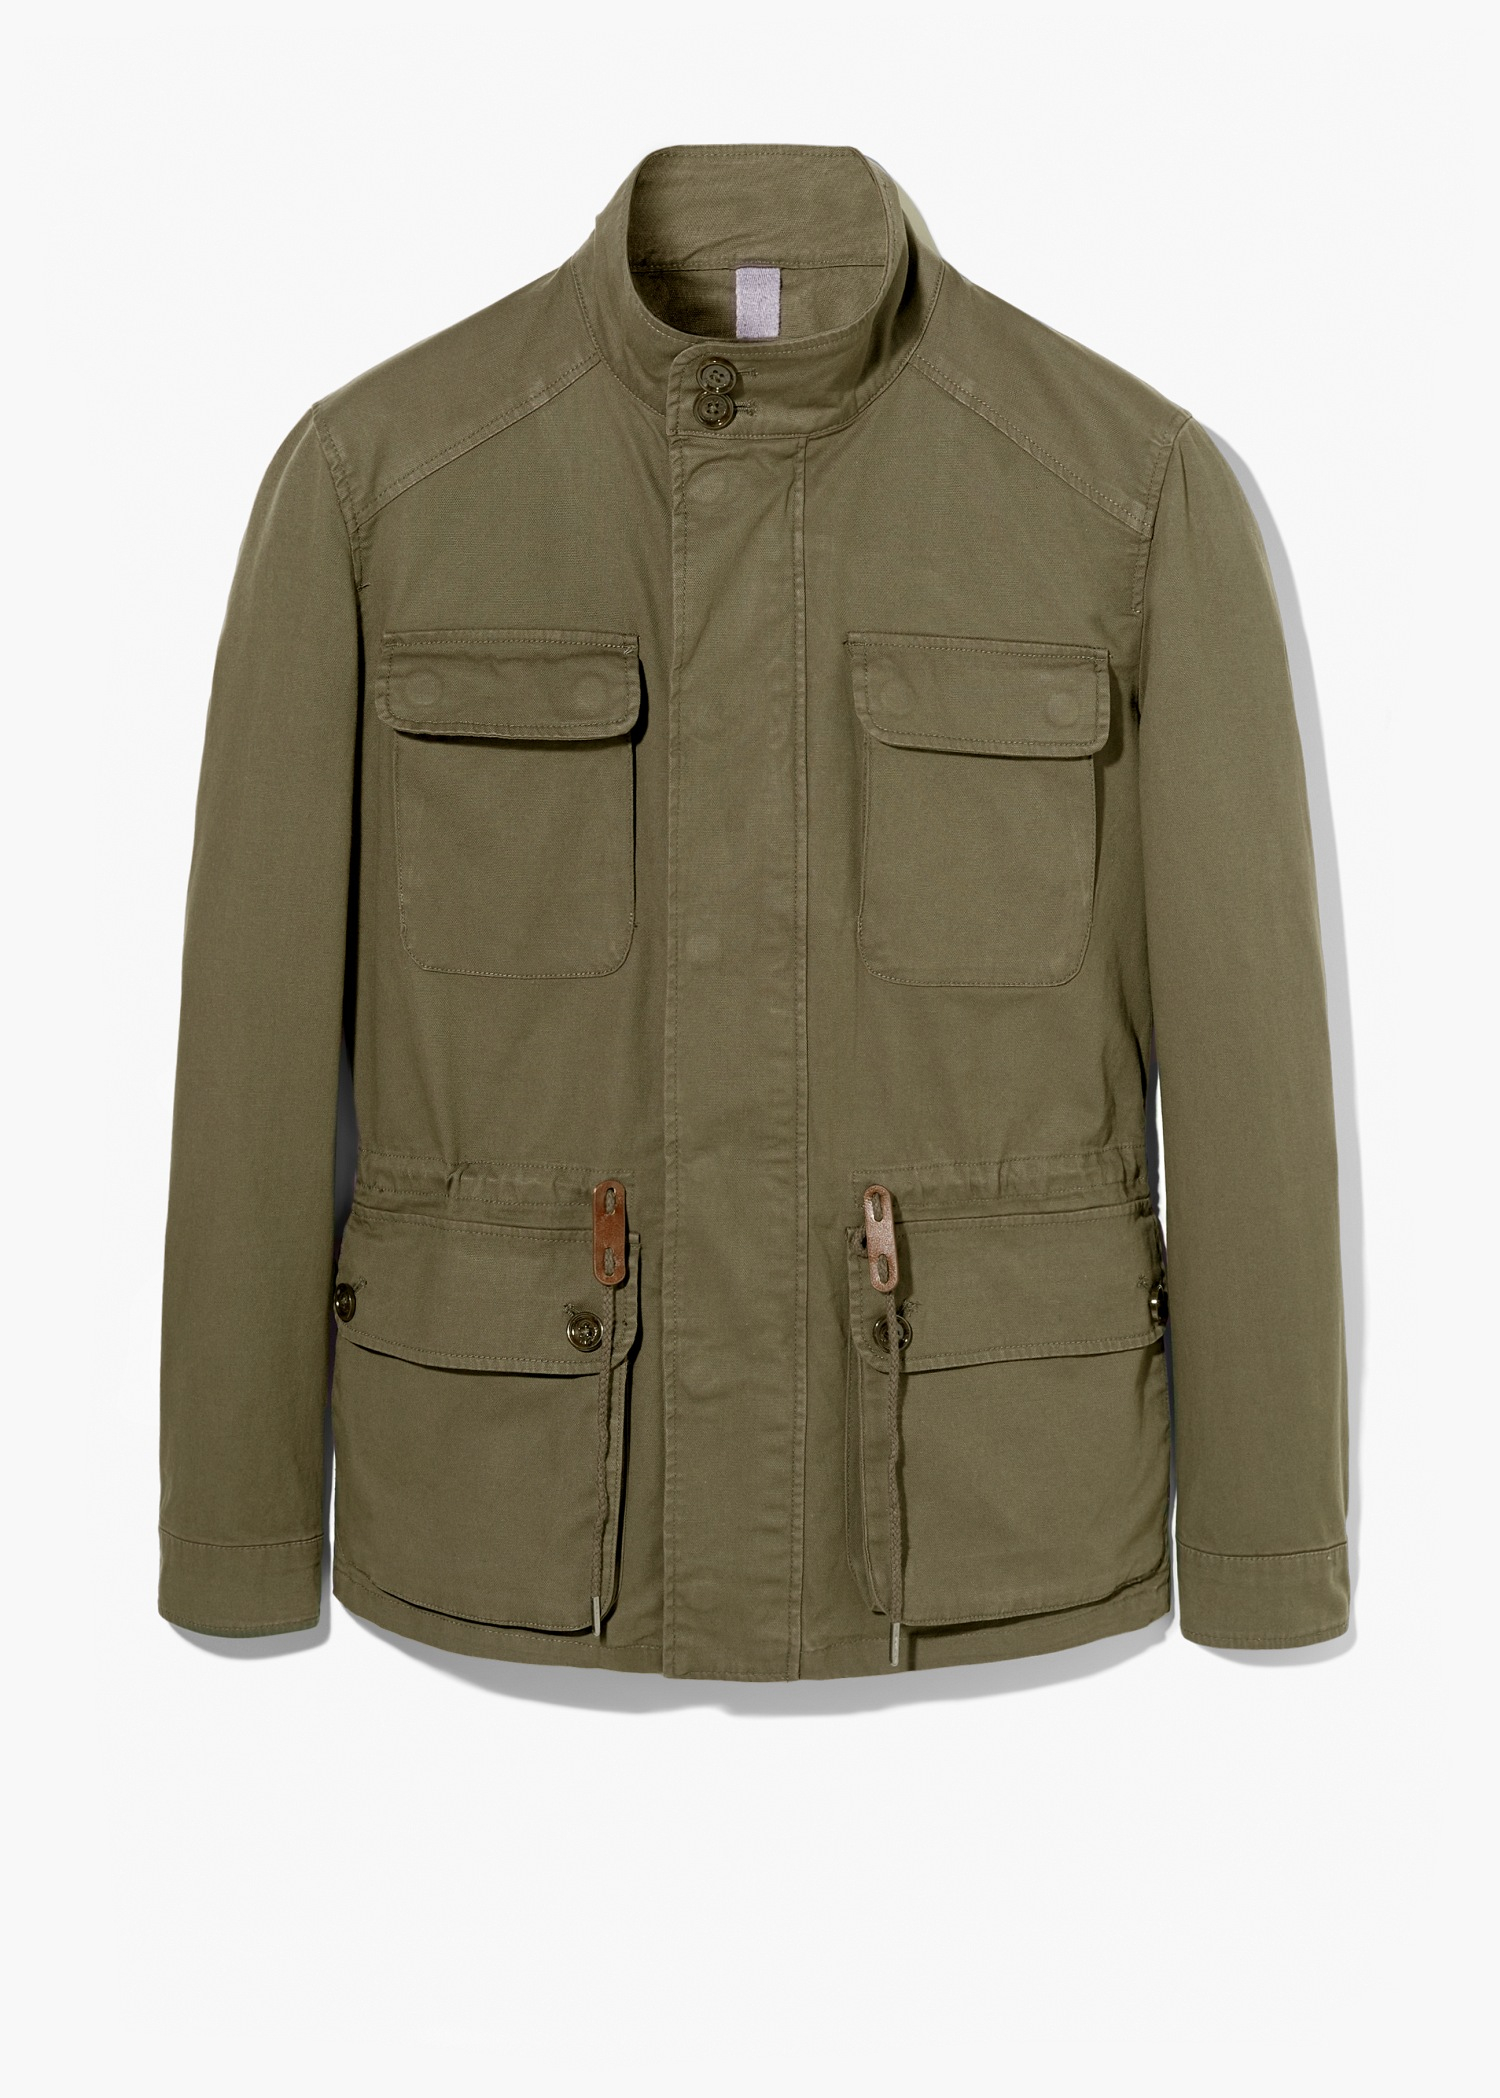 Lyst - Mango Cotton-Canvas Field Jacket in Natural for Men